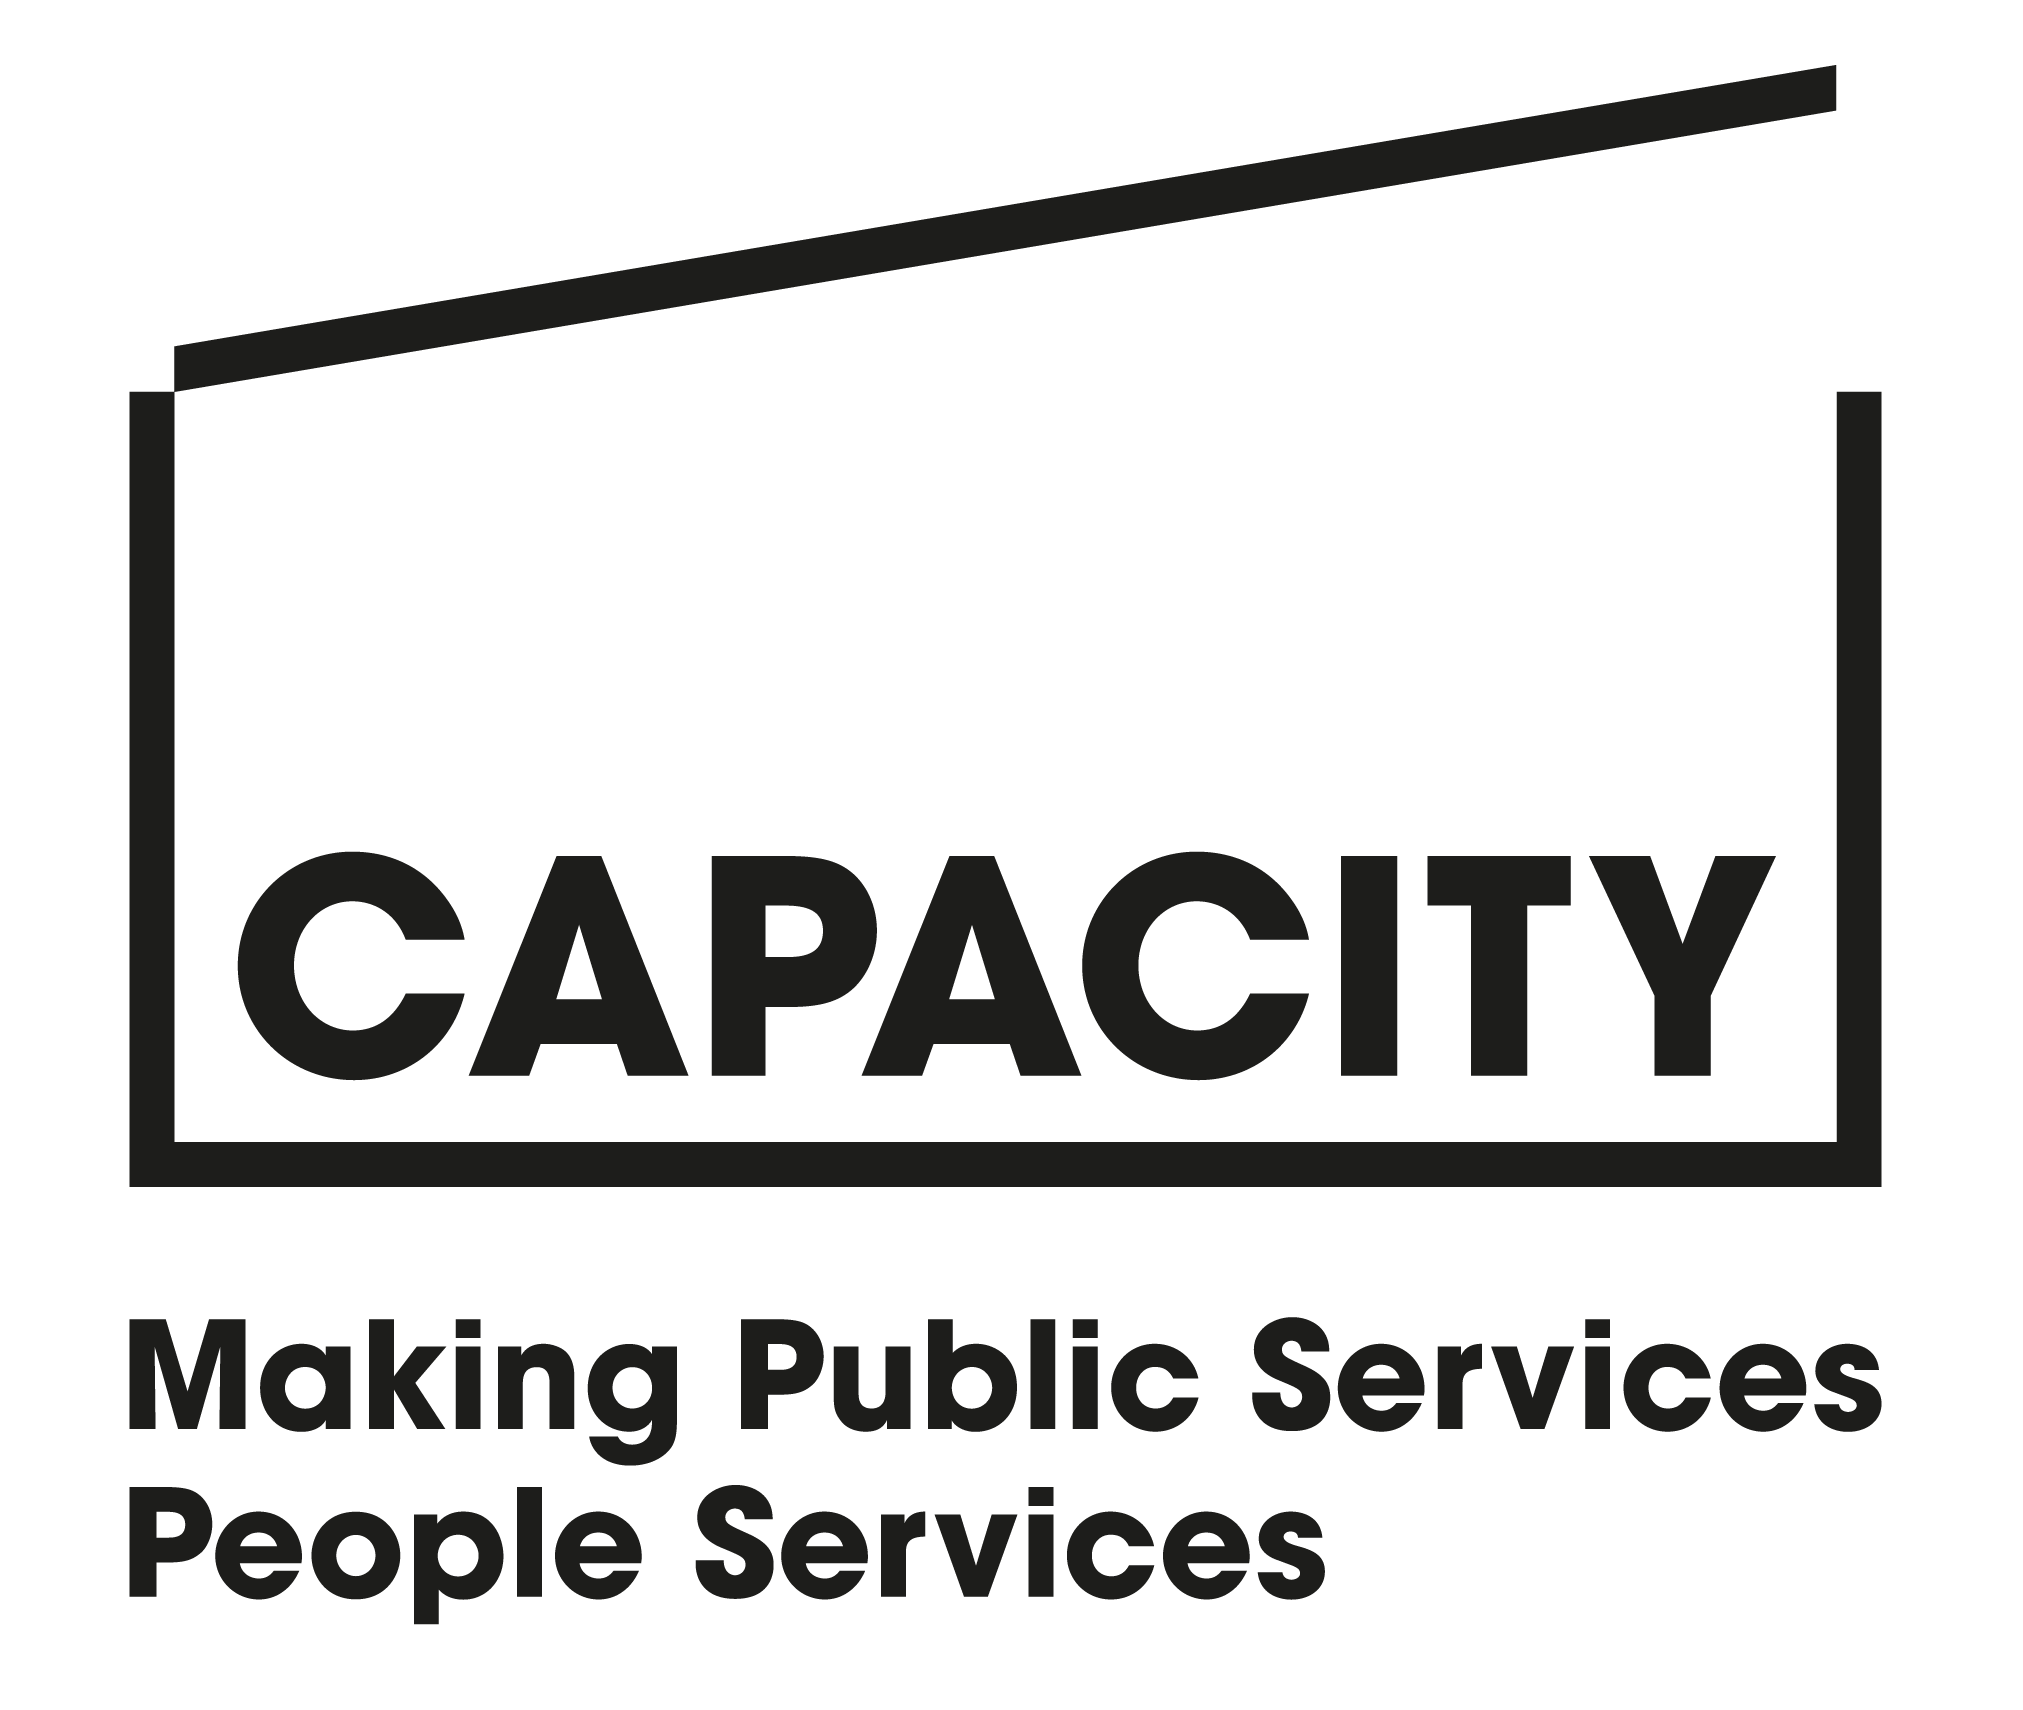 Capacity - Making Public Services People Services (Logo)